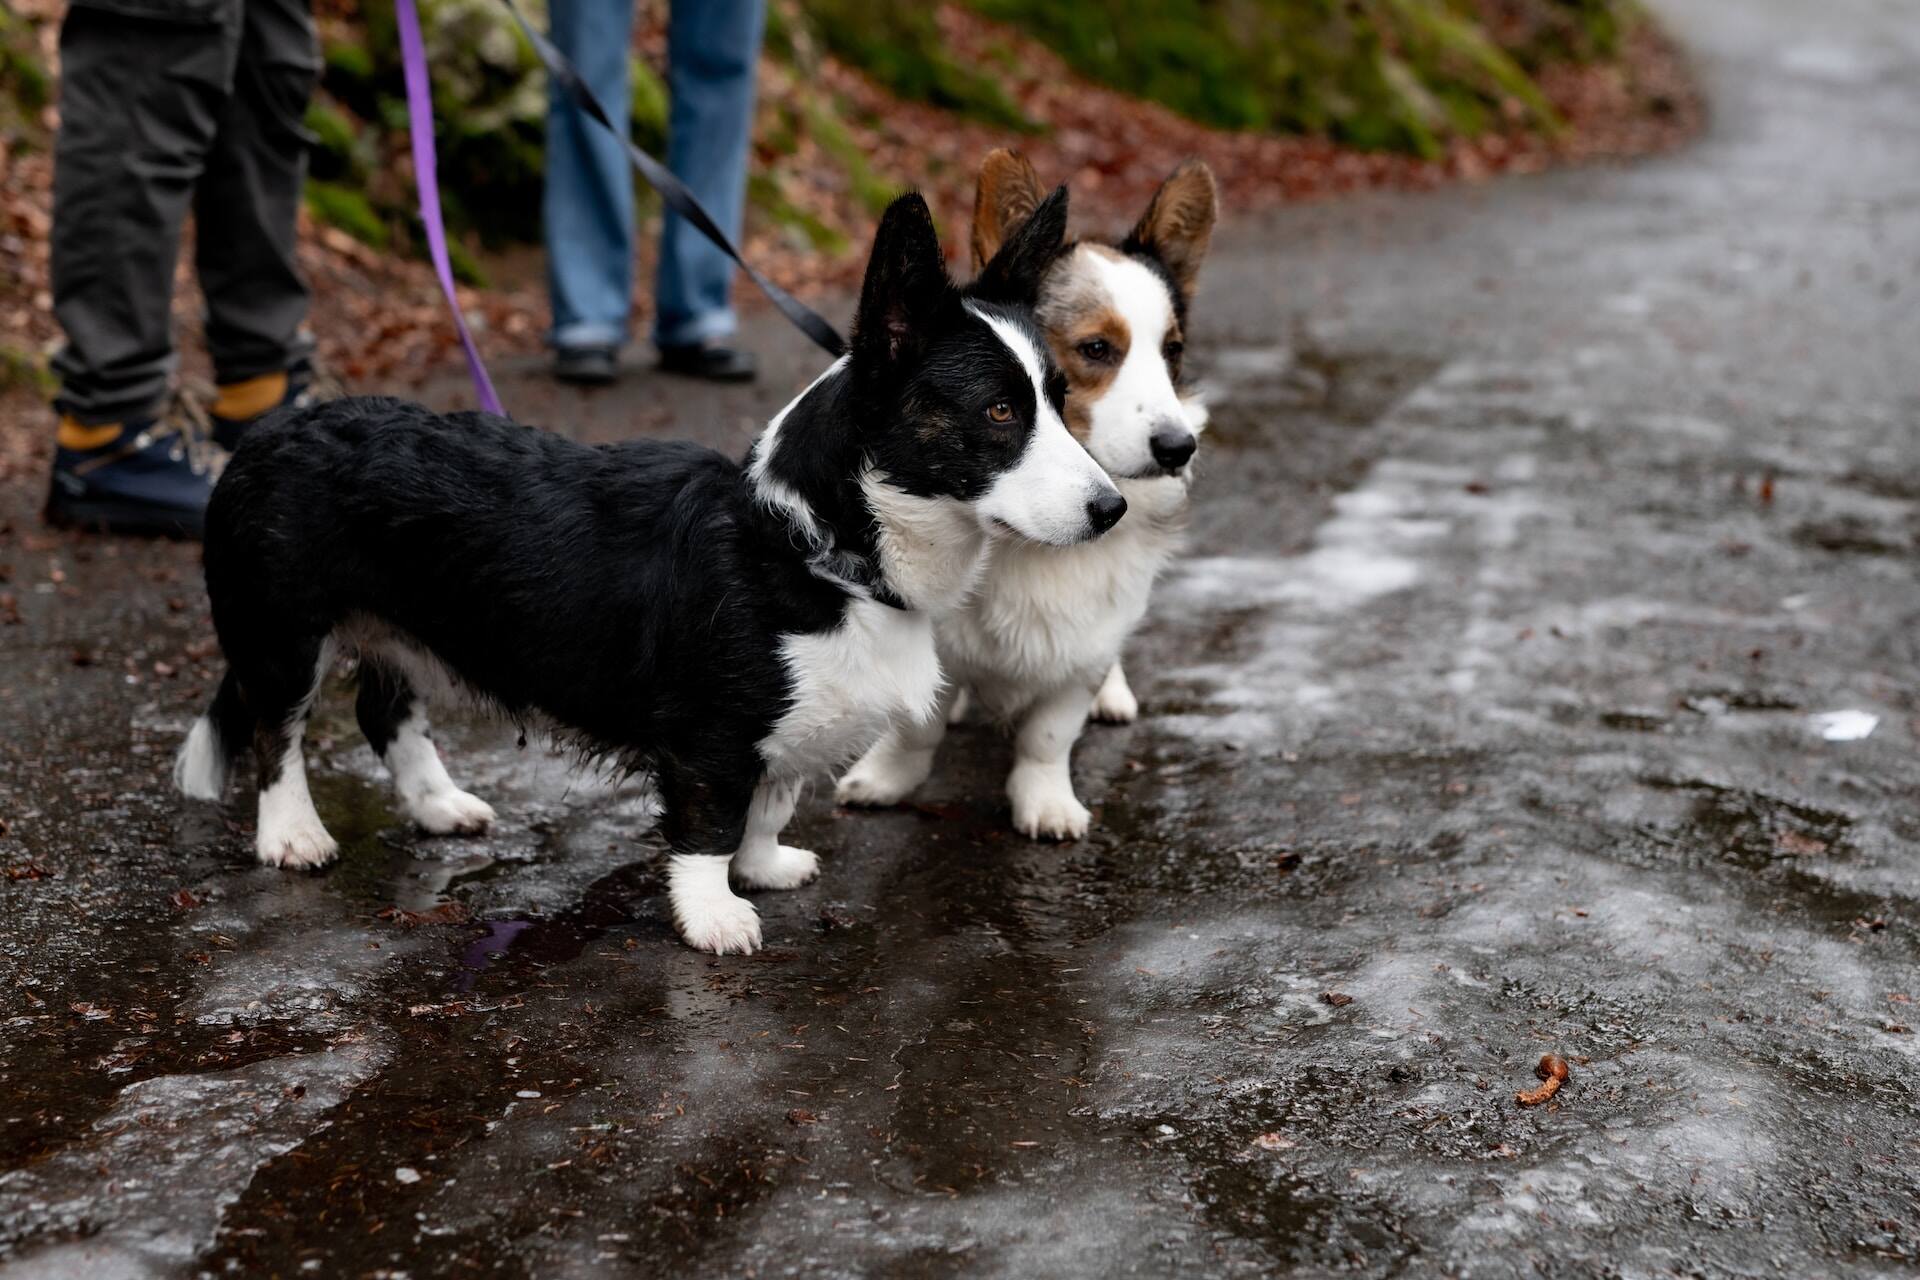 Two Corgis walking on leashes outdoors on an icy path